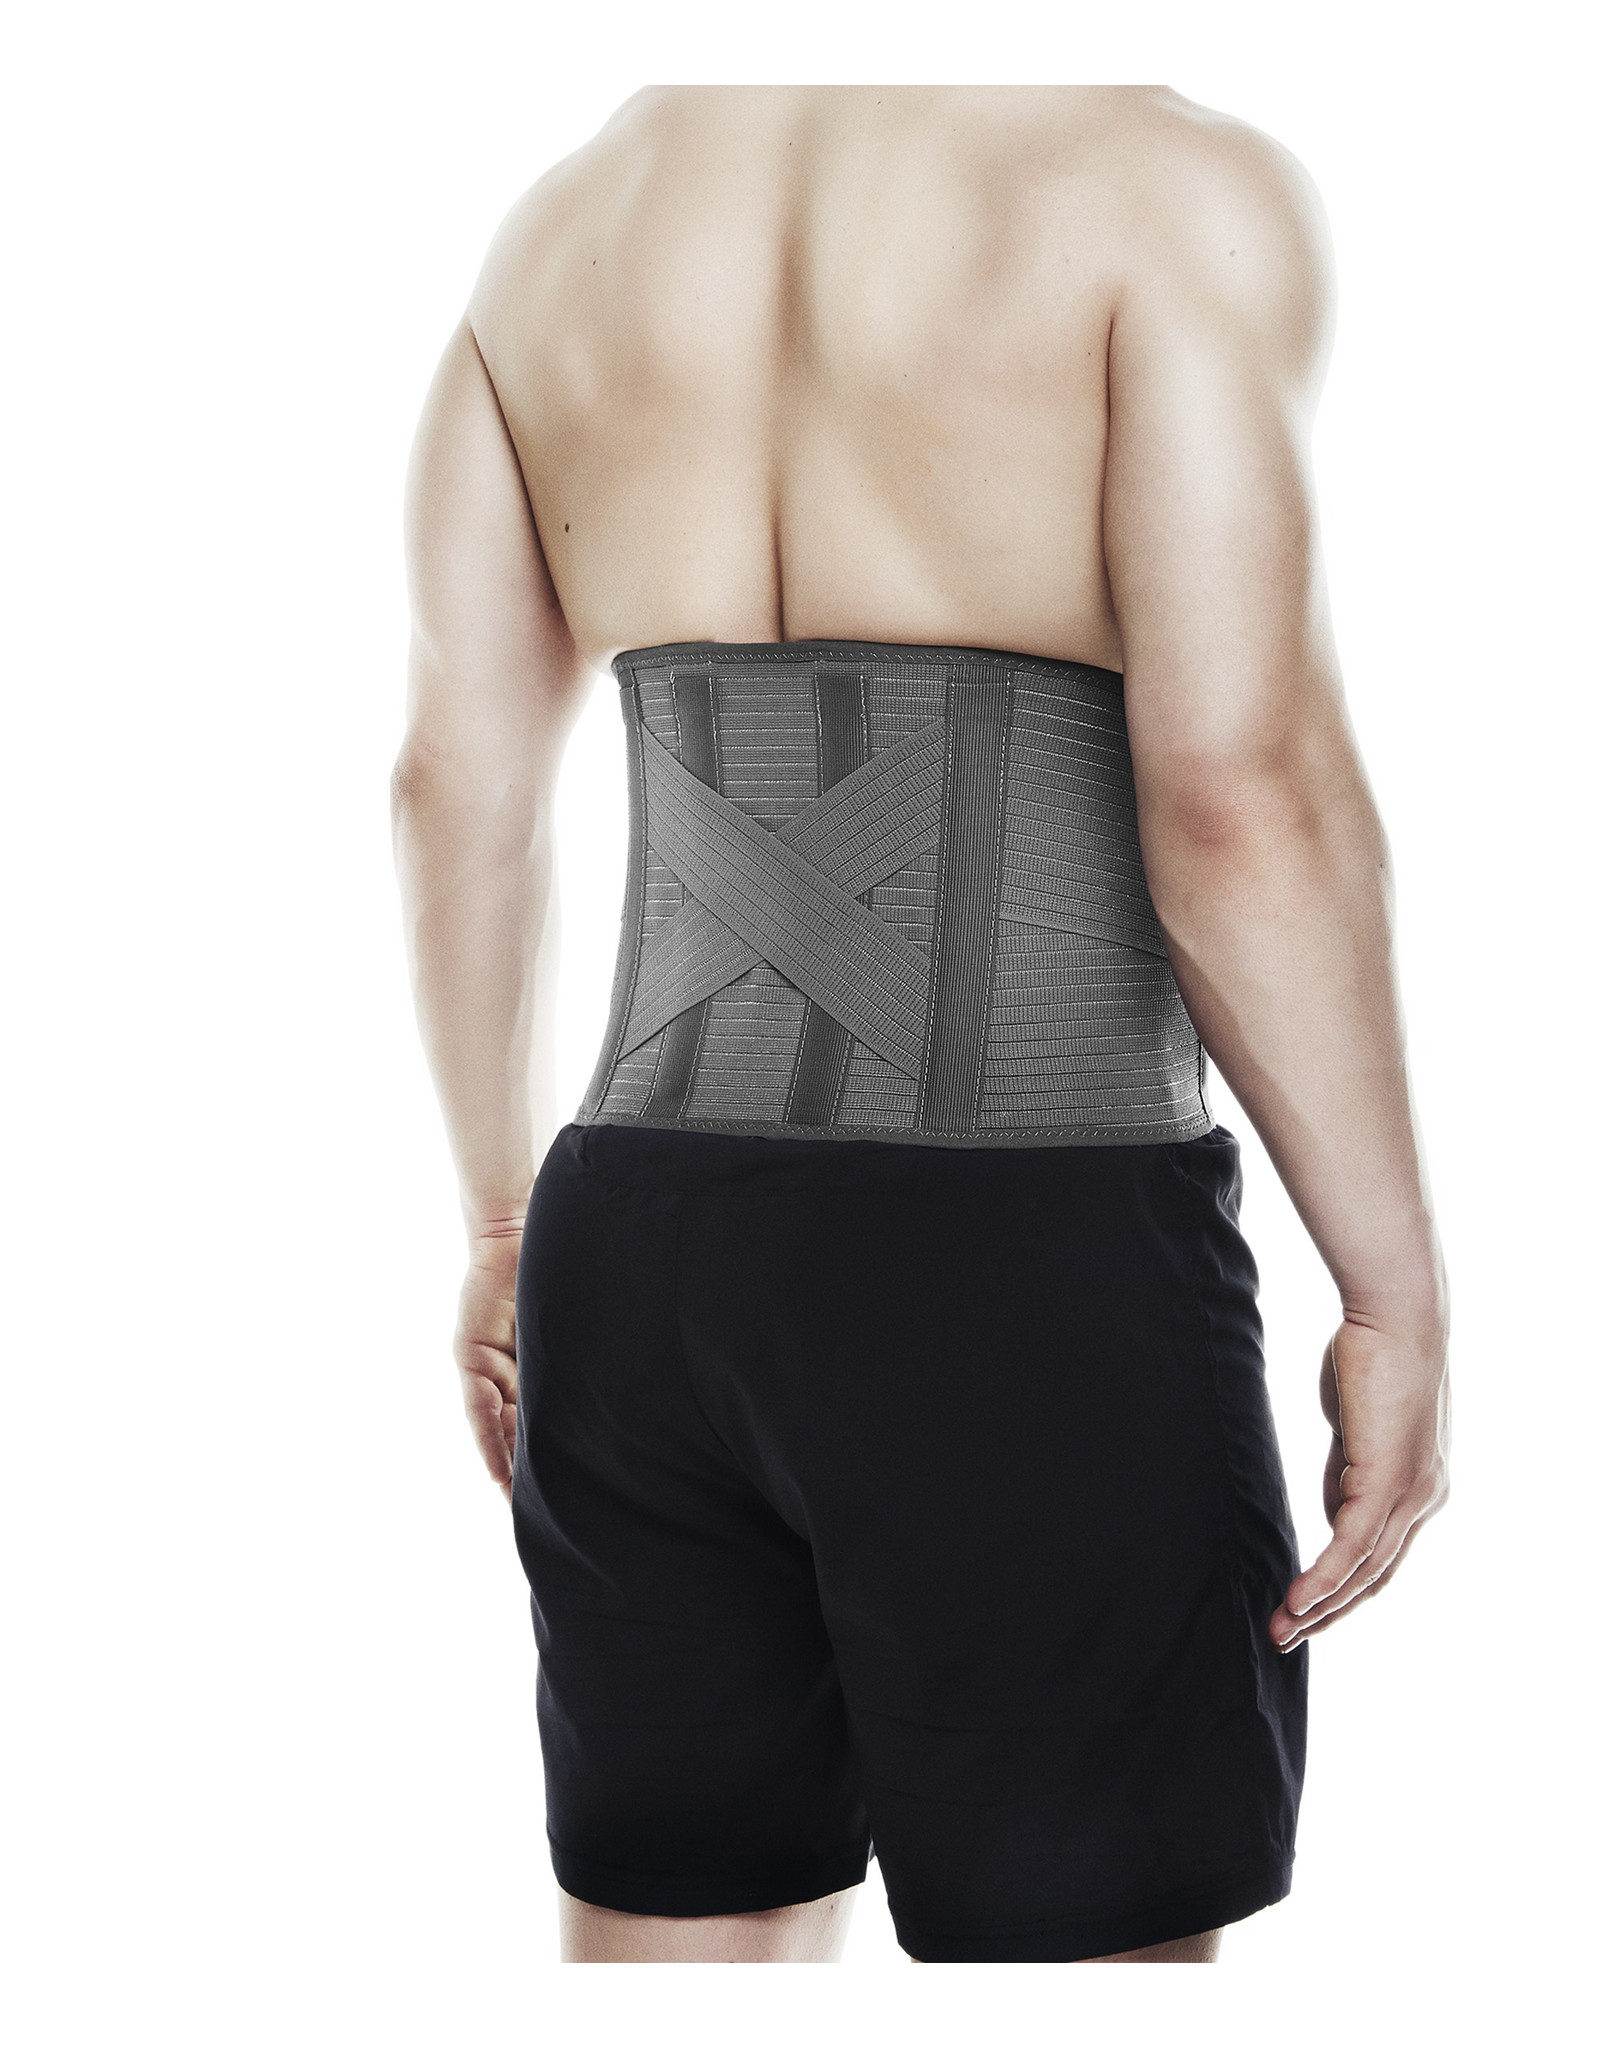 Rehband QD Knitted Back Support